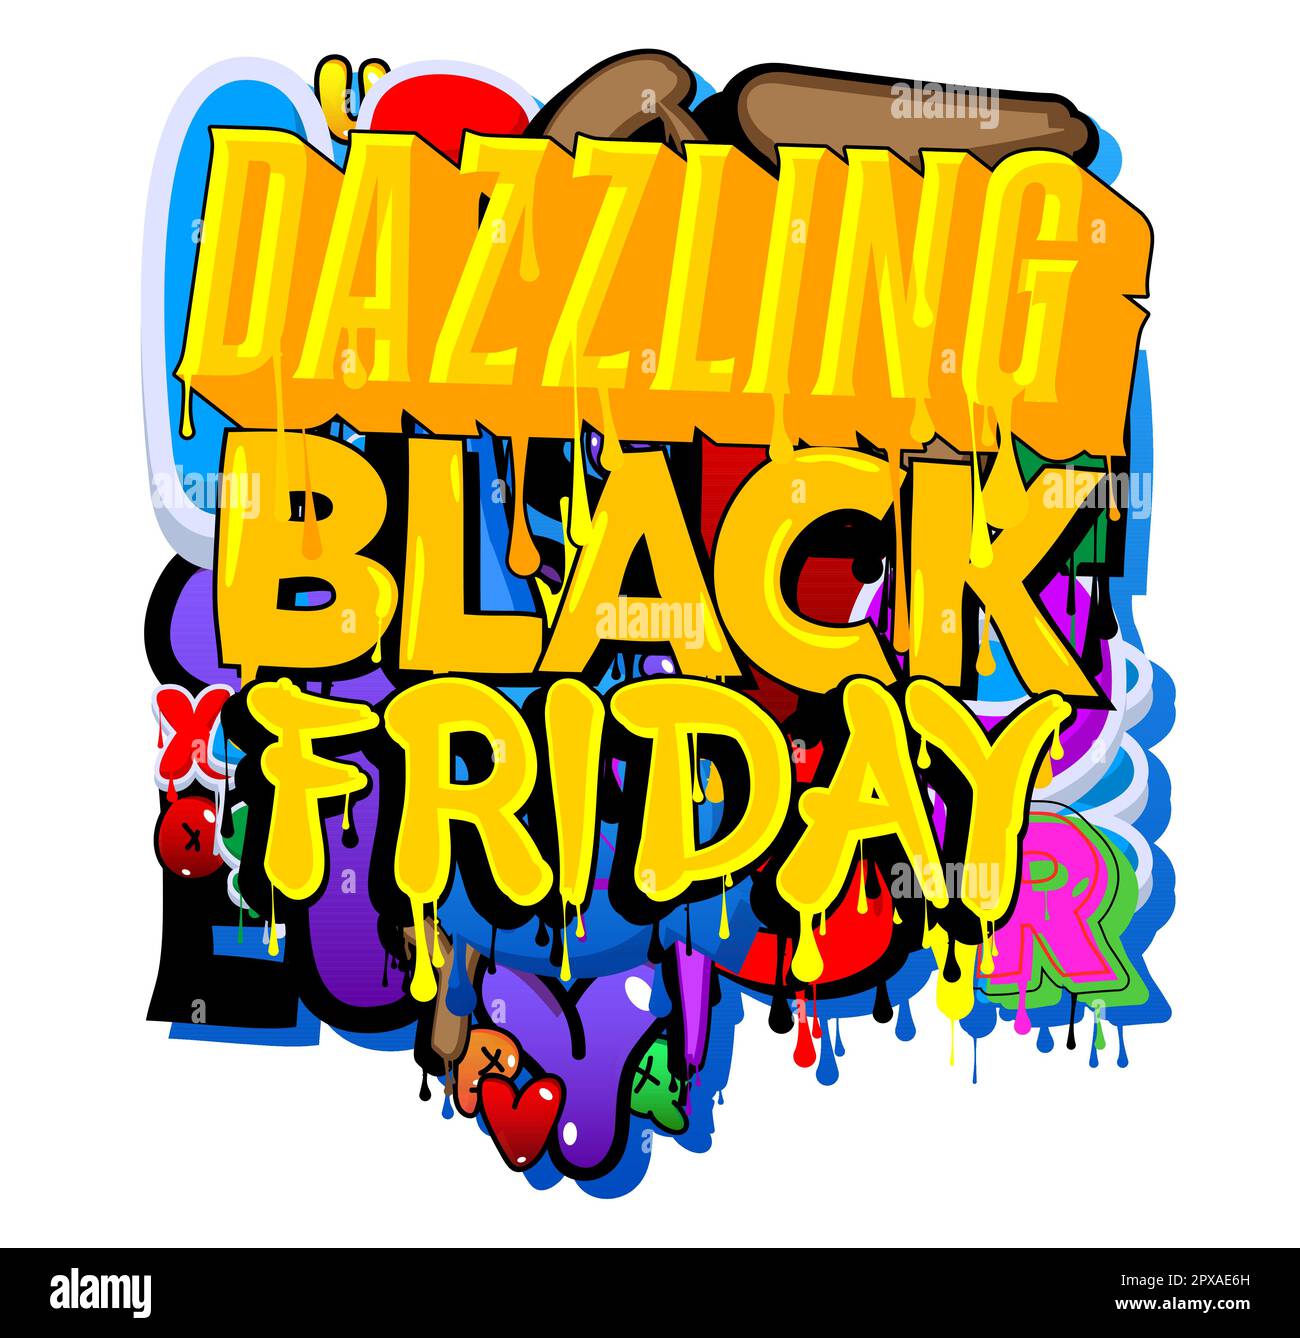 Dazzling Black Friday. Graffiti tag. Abstract modern street art decoration performed in urban painting style. Stock Vector